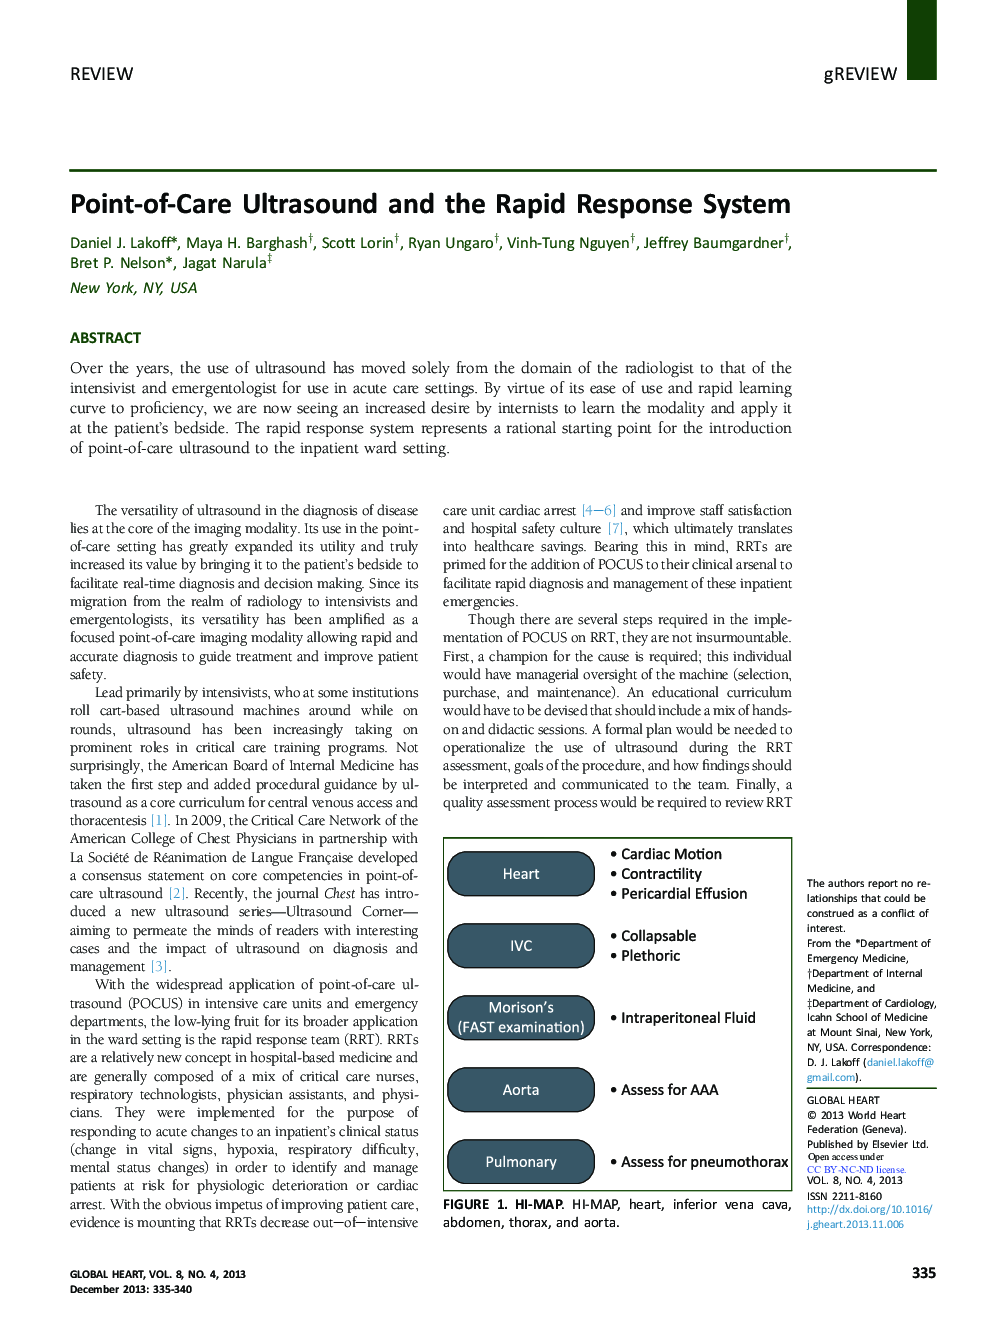 Point-of-Care Ultrasound and the Rapid Response System